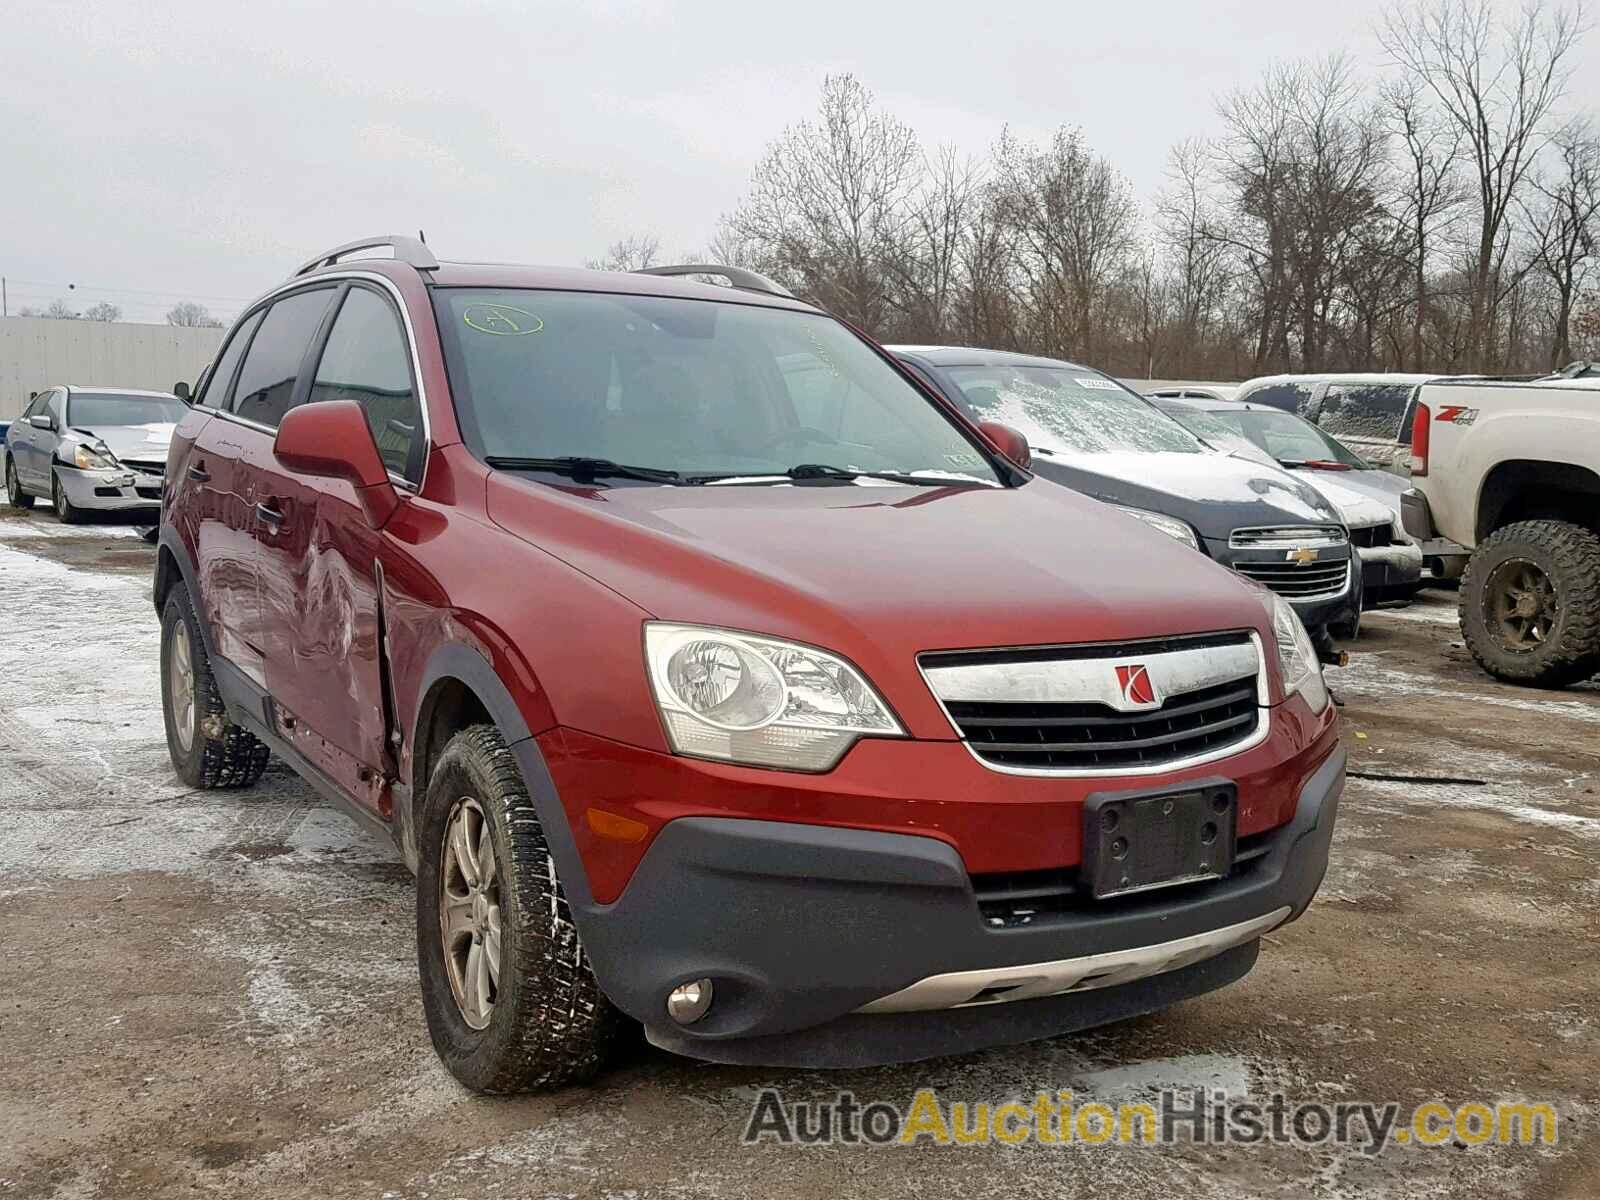 2009 SATURN VUE XE, 3GSCL33P19S583591